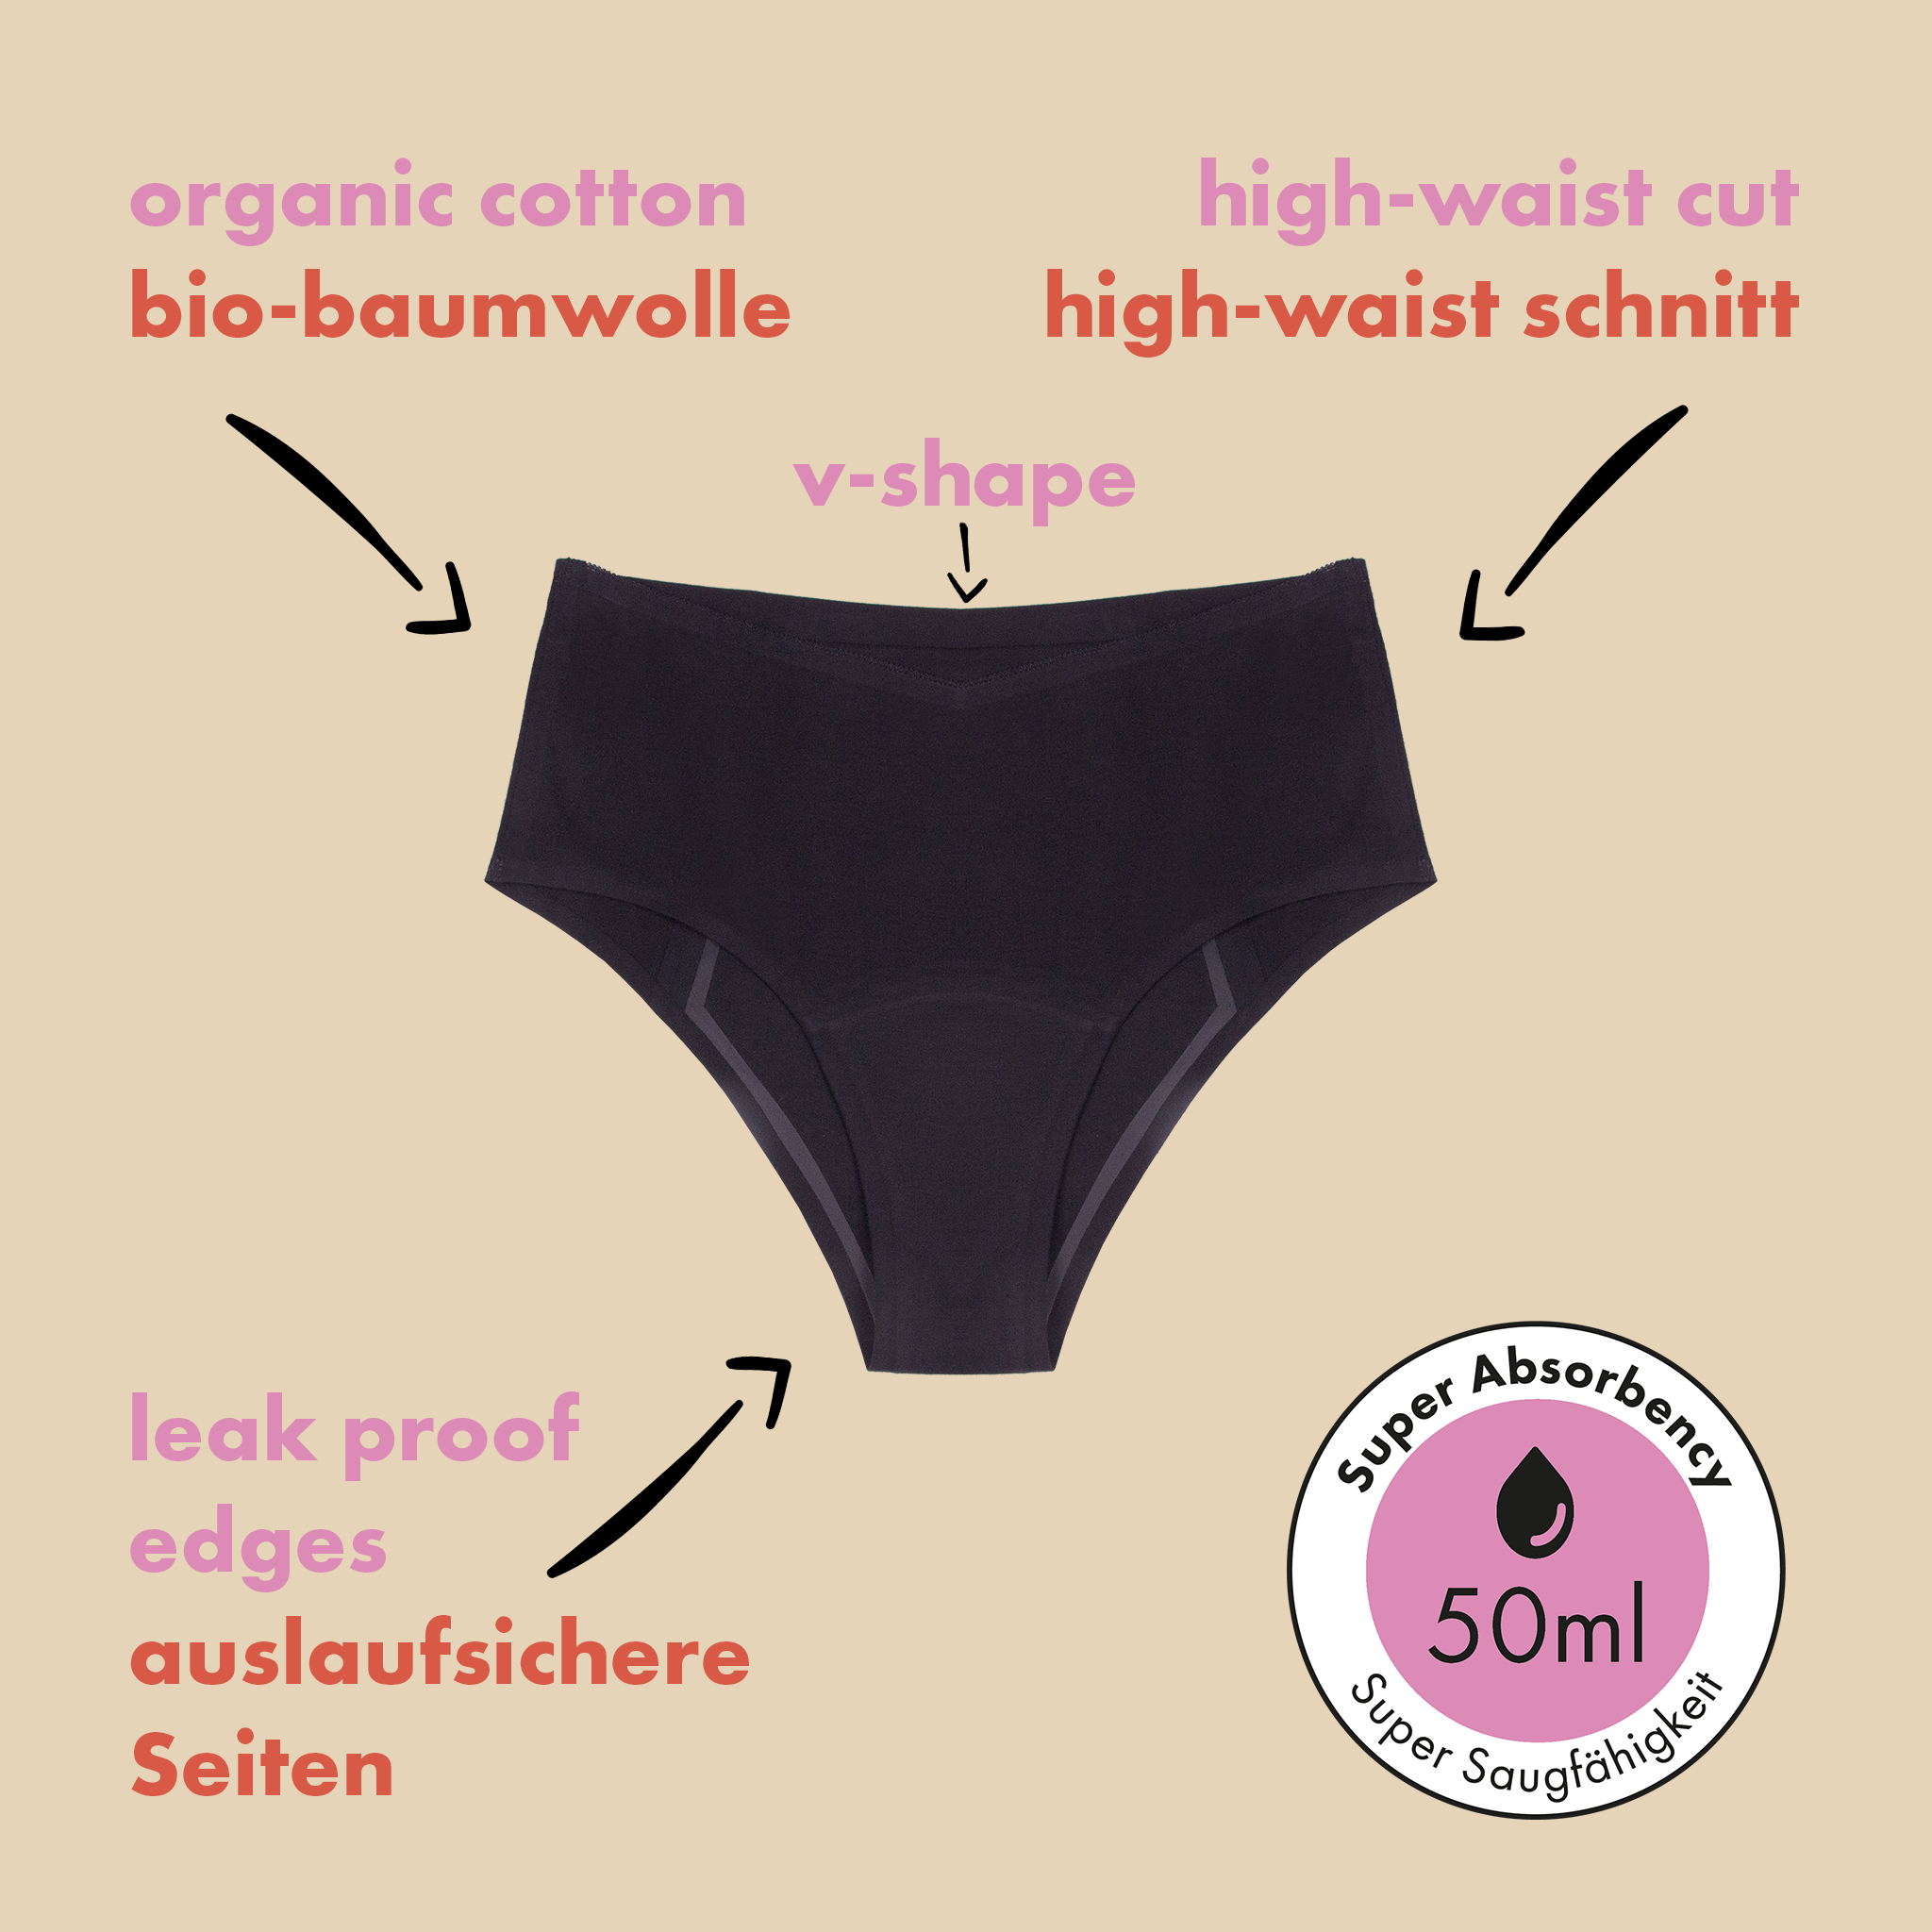 dais maternity absorbent underwear showing the main benefits that they are made of organic cotton, high waist cut with v shape, leak proof edges and super absorbency of up to 50ml. 